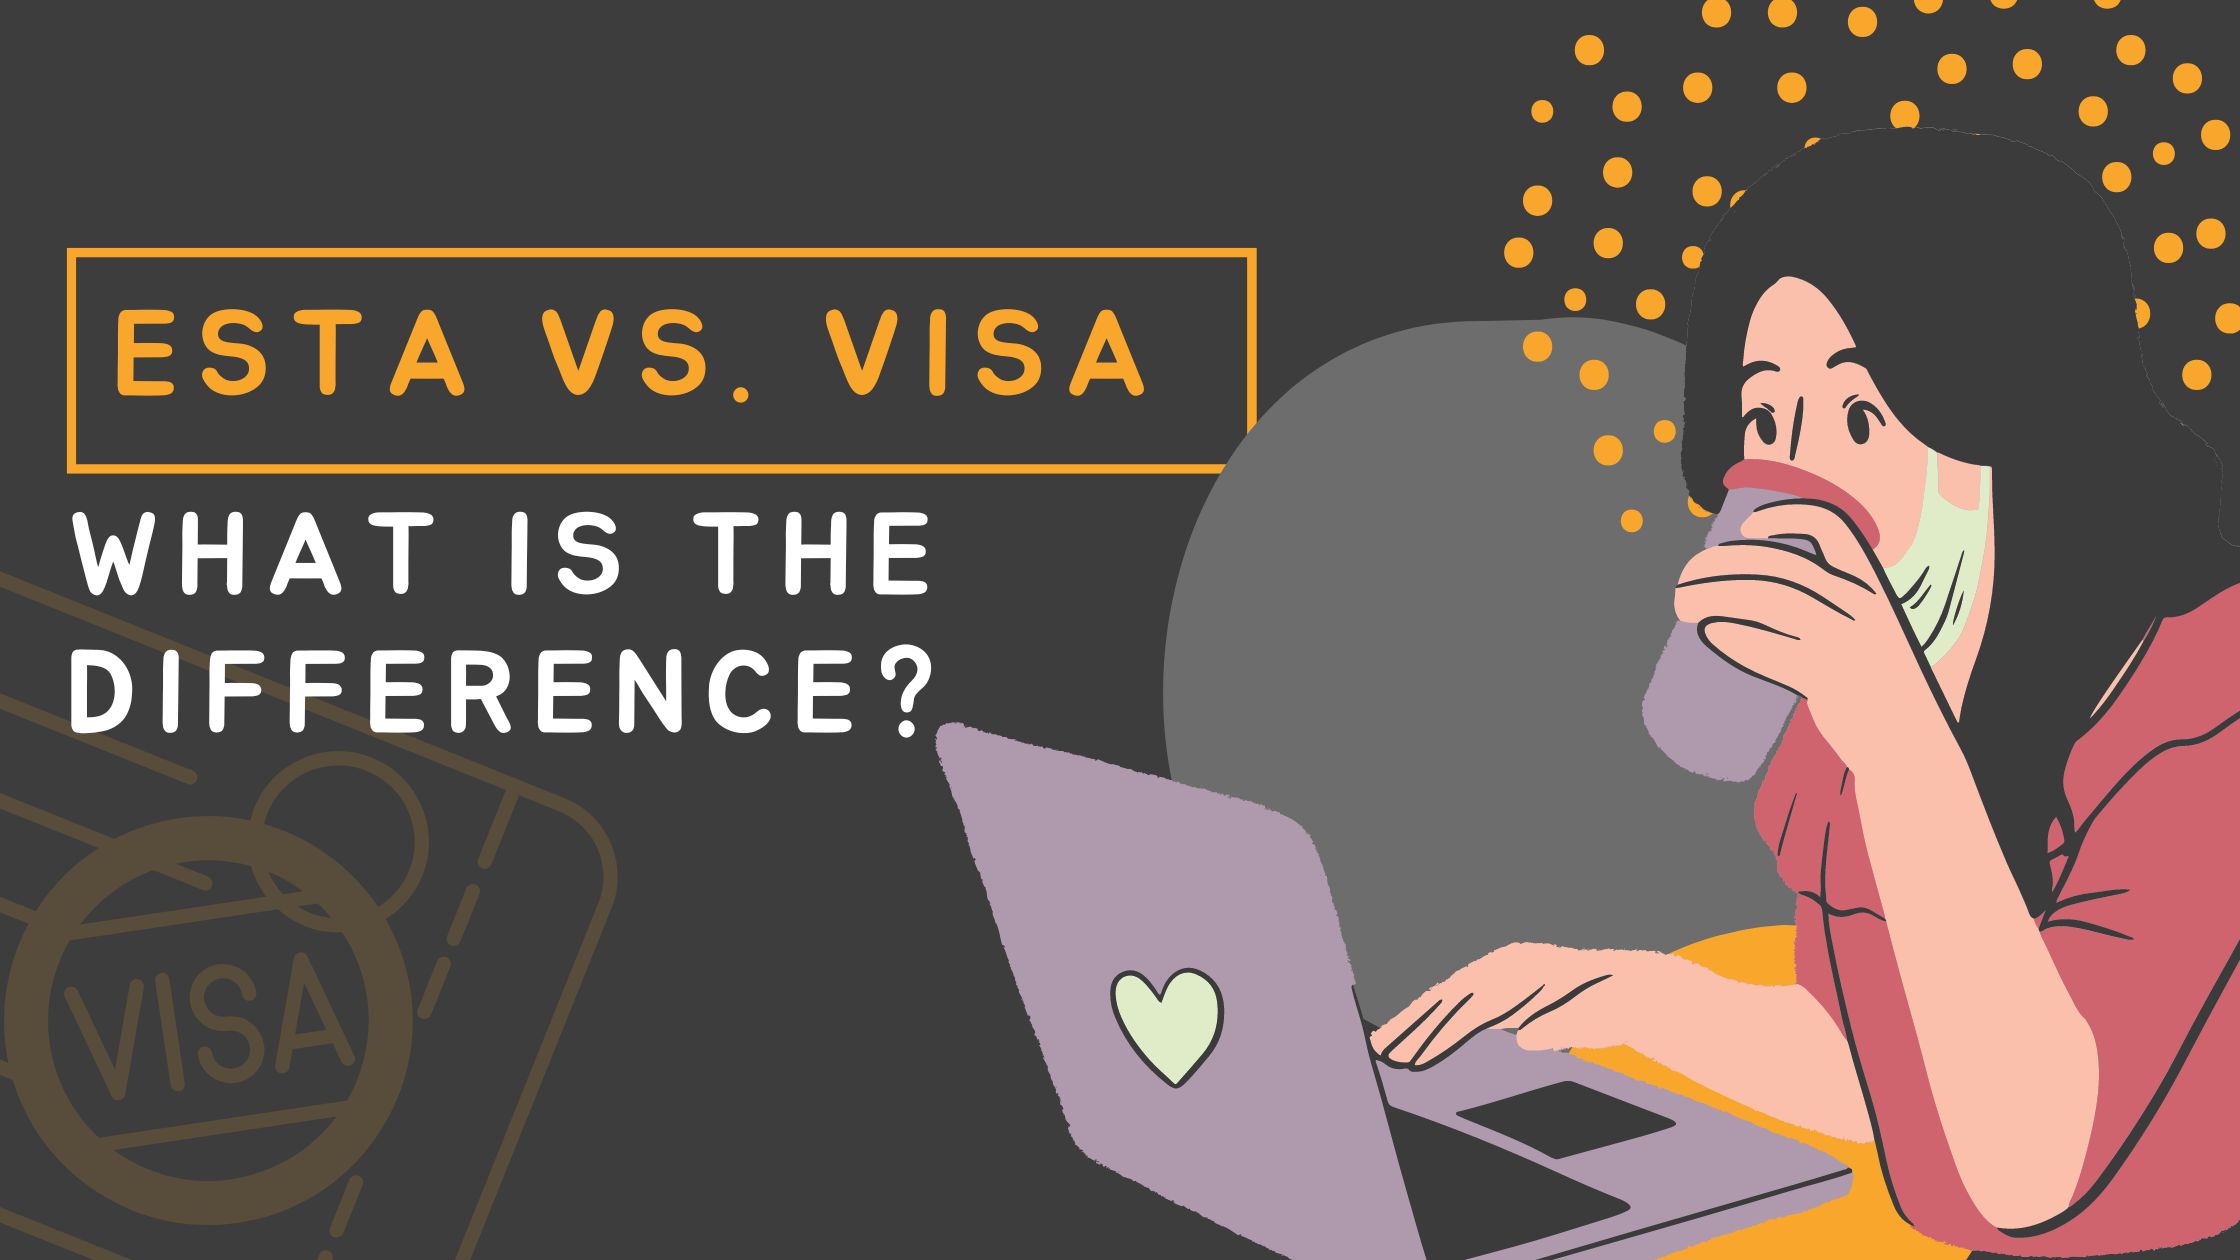 ESTA vs Visa: What is the difference?